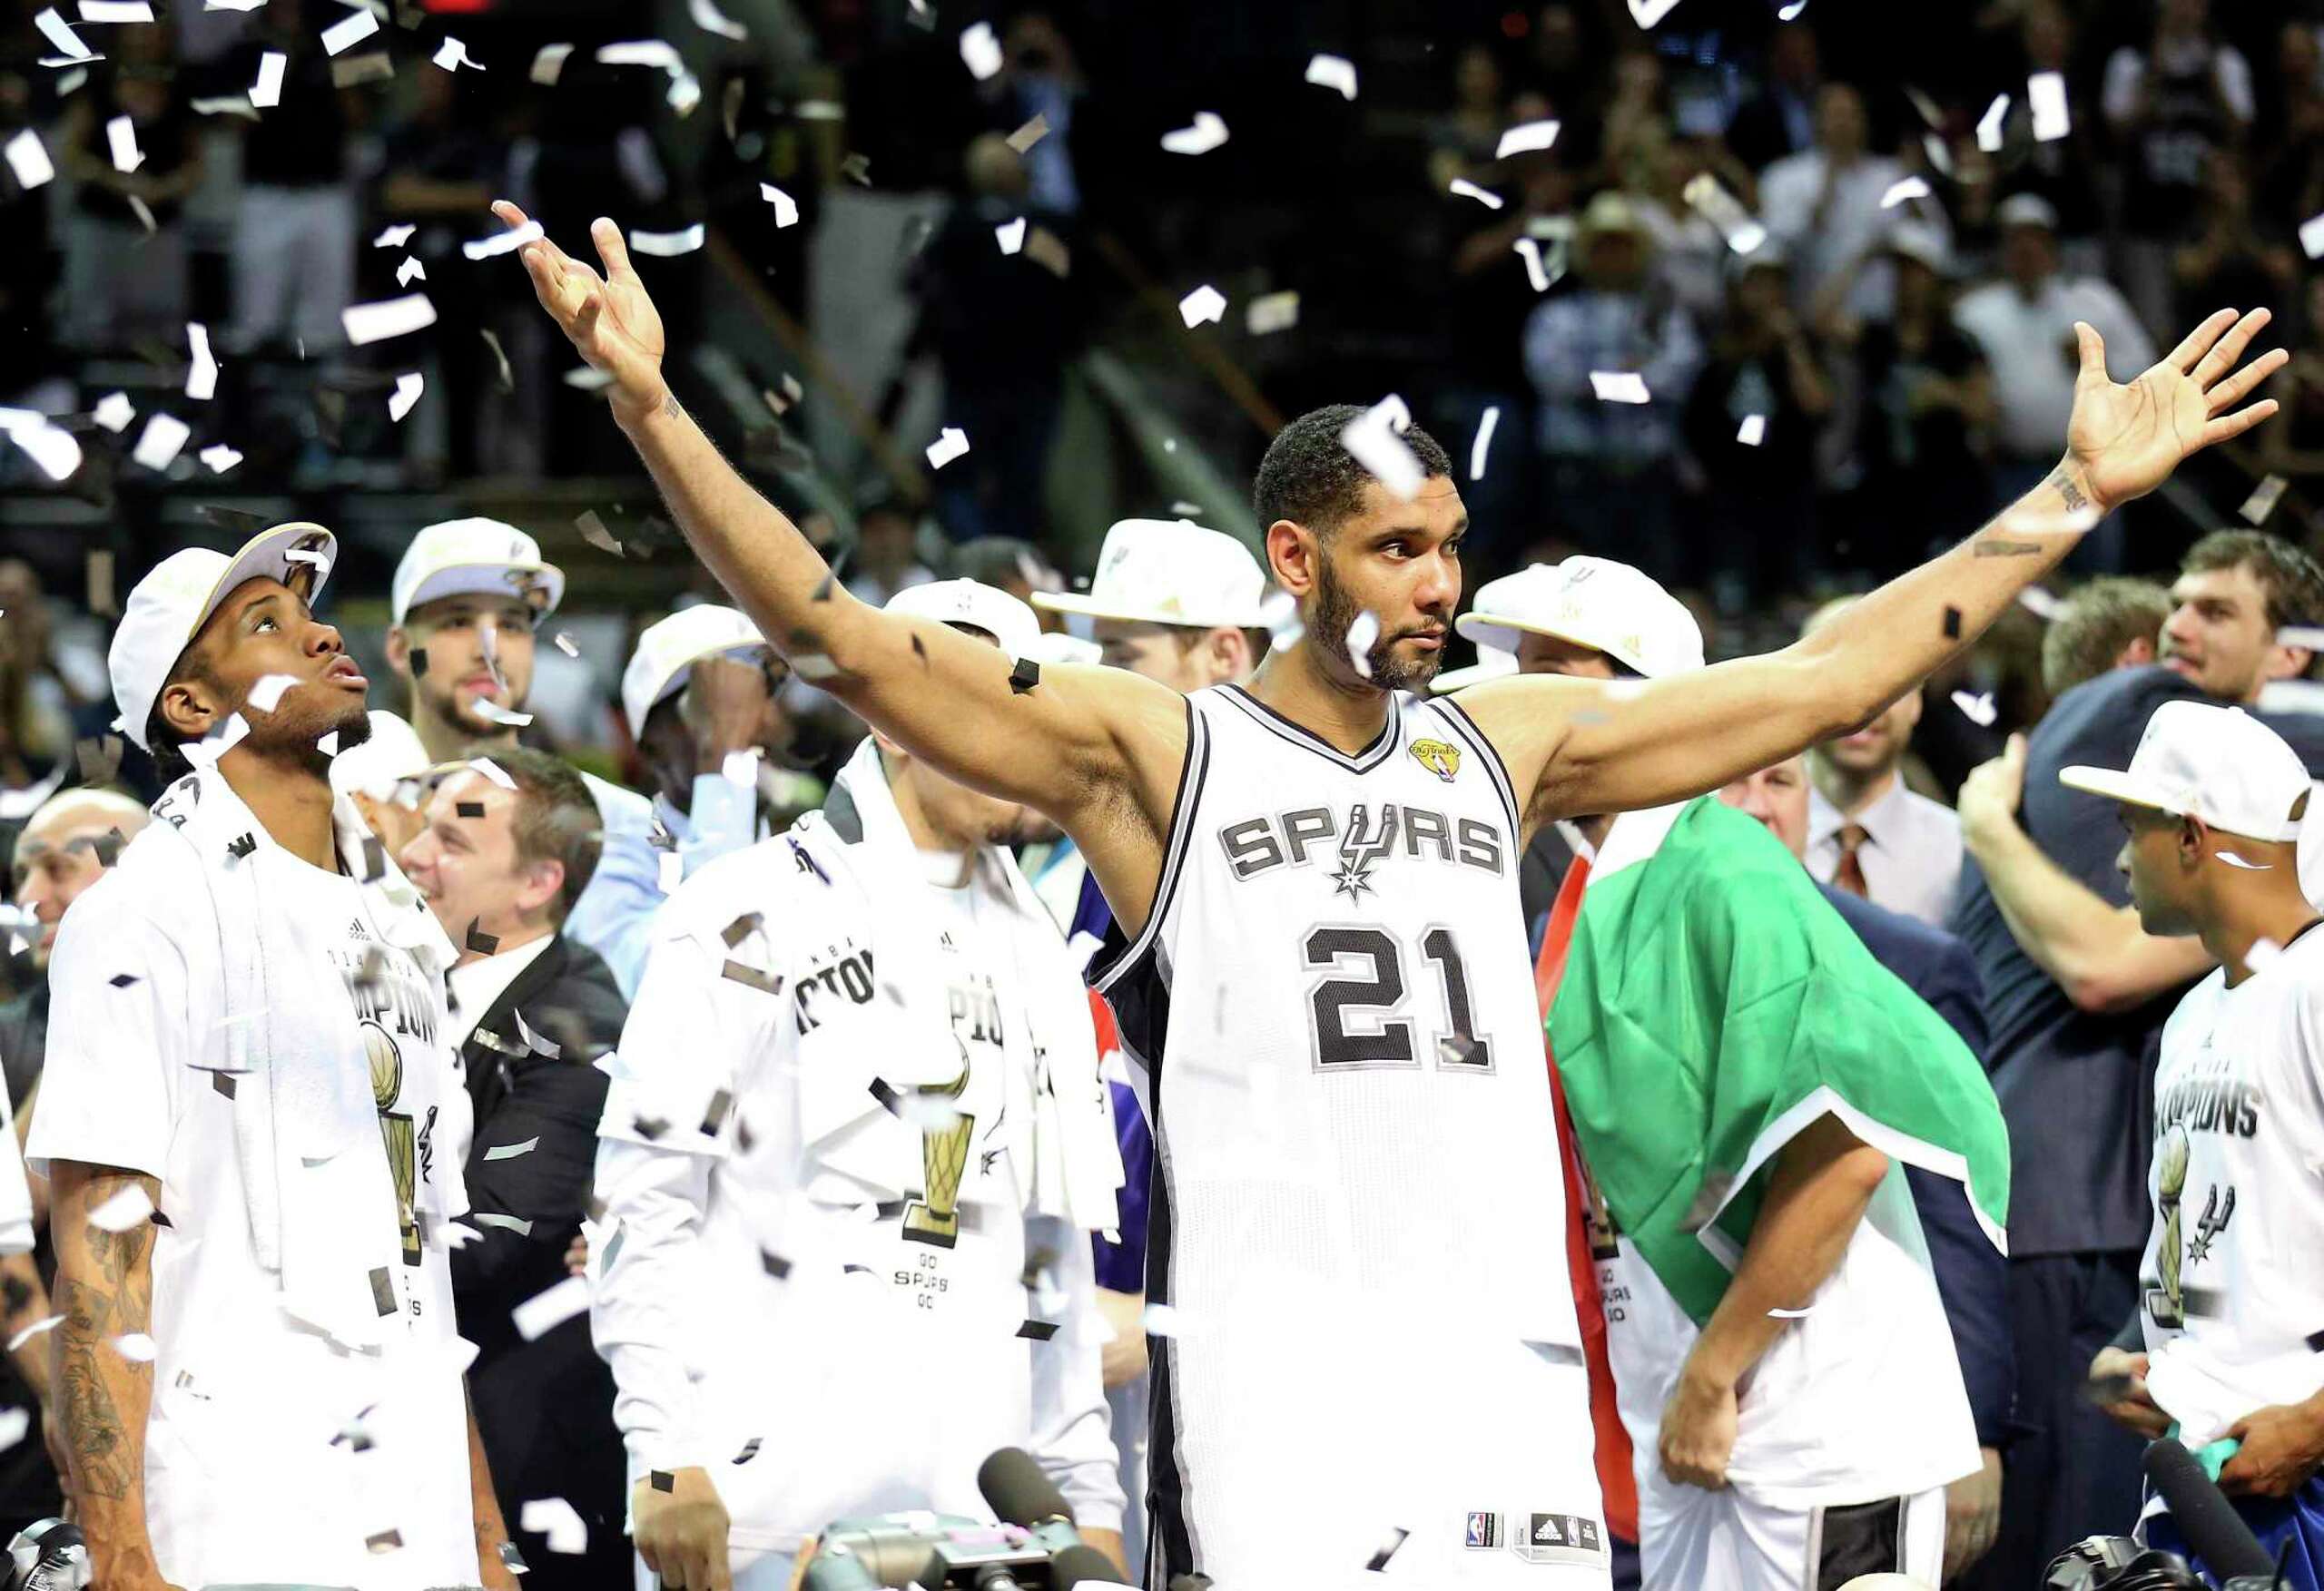 Iconic moments from 49 Years of Spurs Basketball